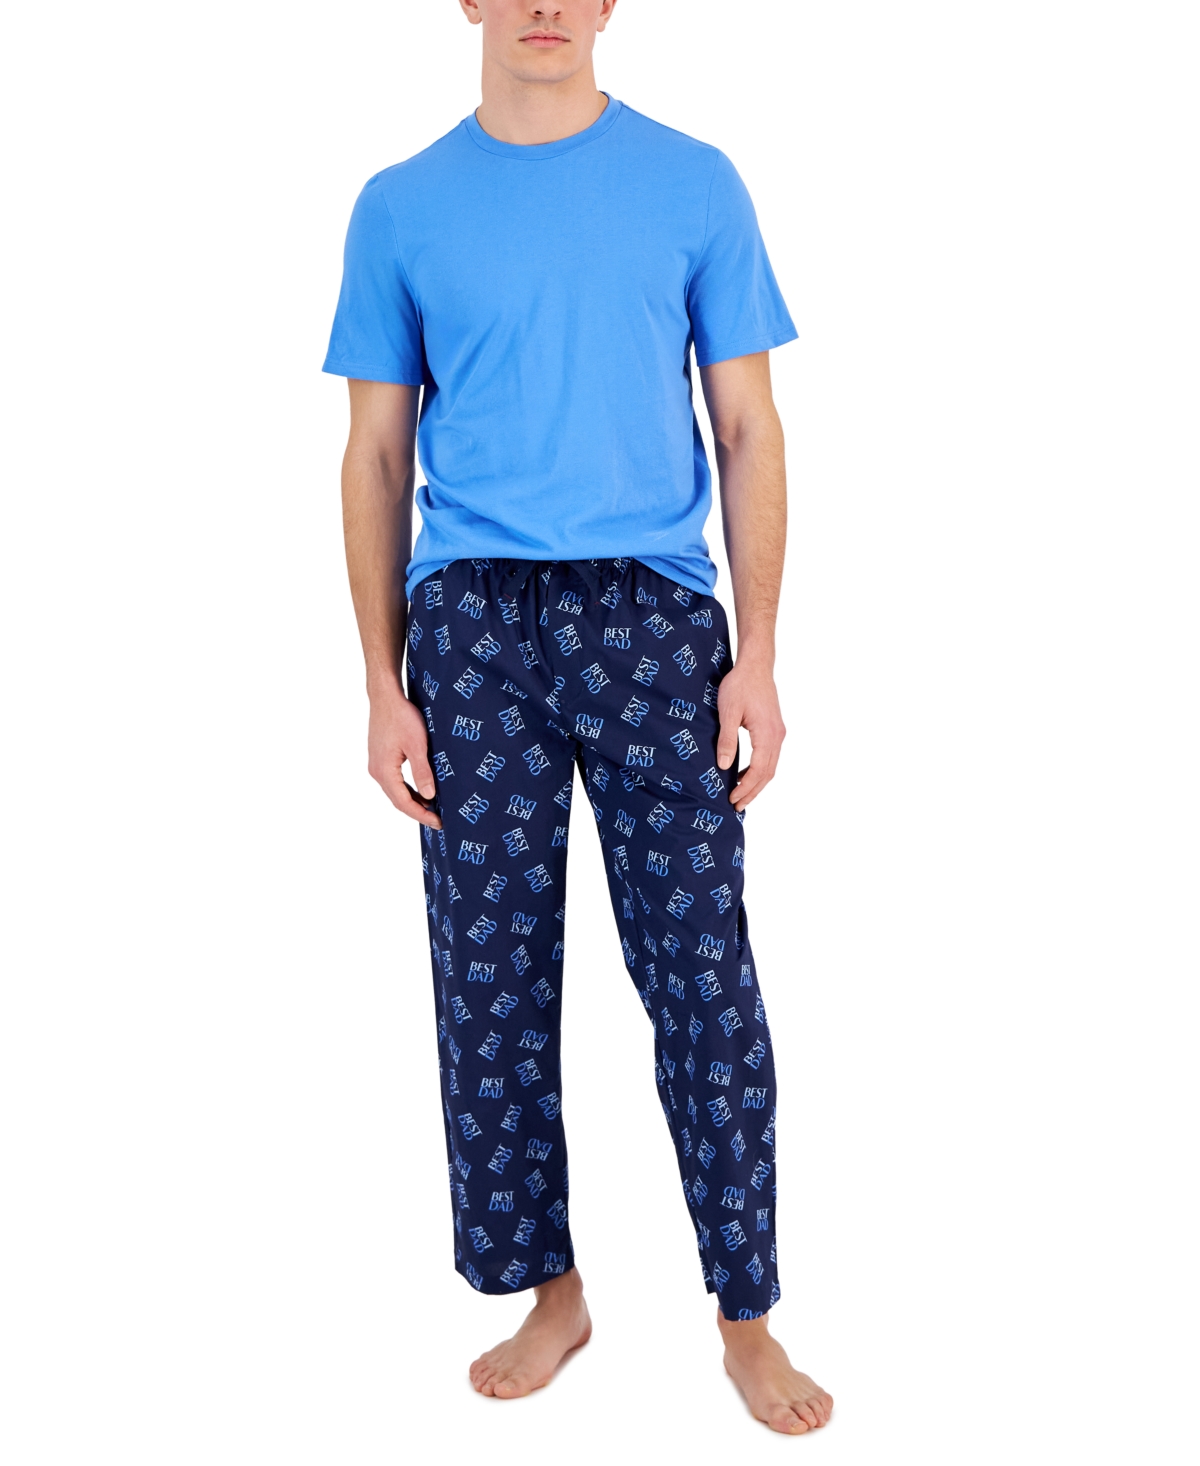 Men's 2-Pc. Solid T-Shirt & Best Dad Printed Pajama Pants Set, Created for Macy's - Fday Set